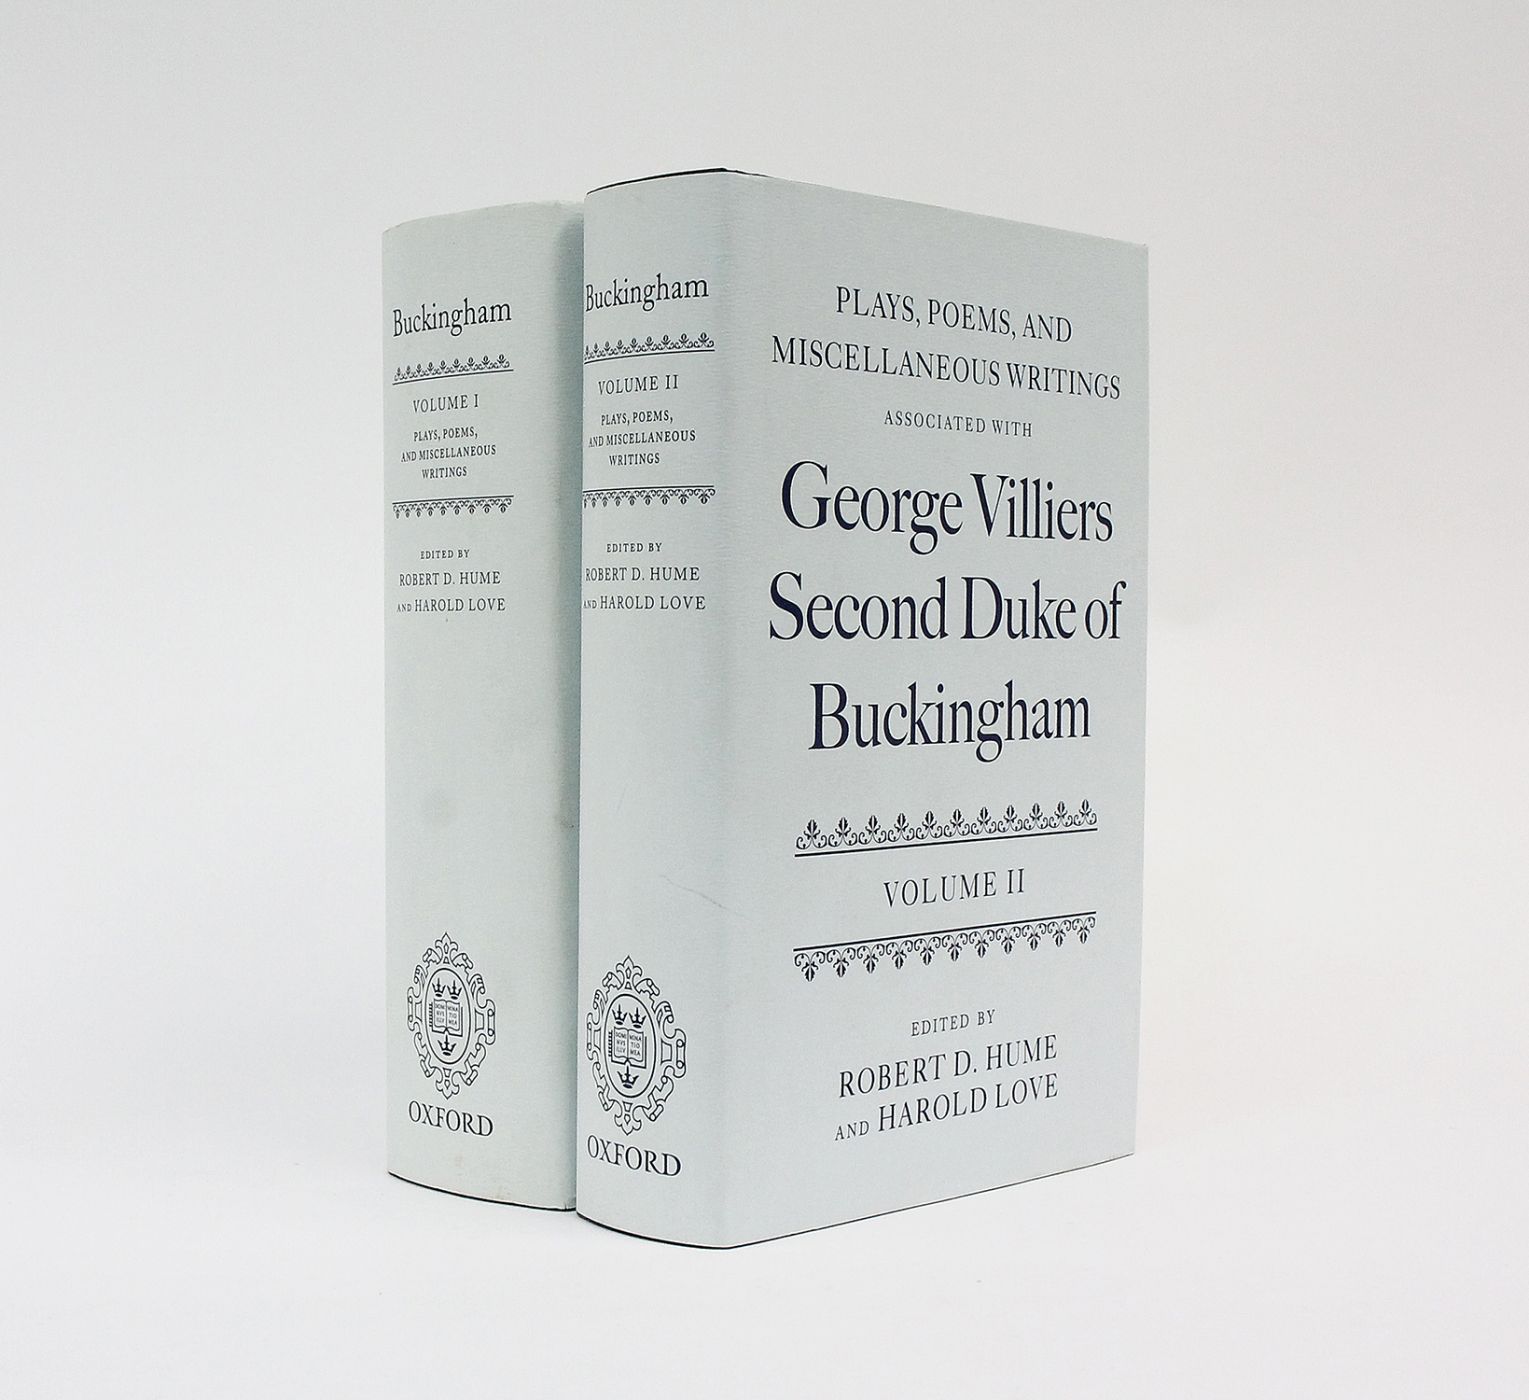 PLAYS, POEMS, AND MISCELLANEOUS WRITINGS ASSOCIATED WITH GEORGE VILLIERS, SECOND DUKE OF BUCKINGHAM: -  image 1